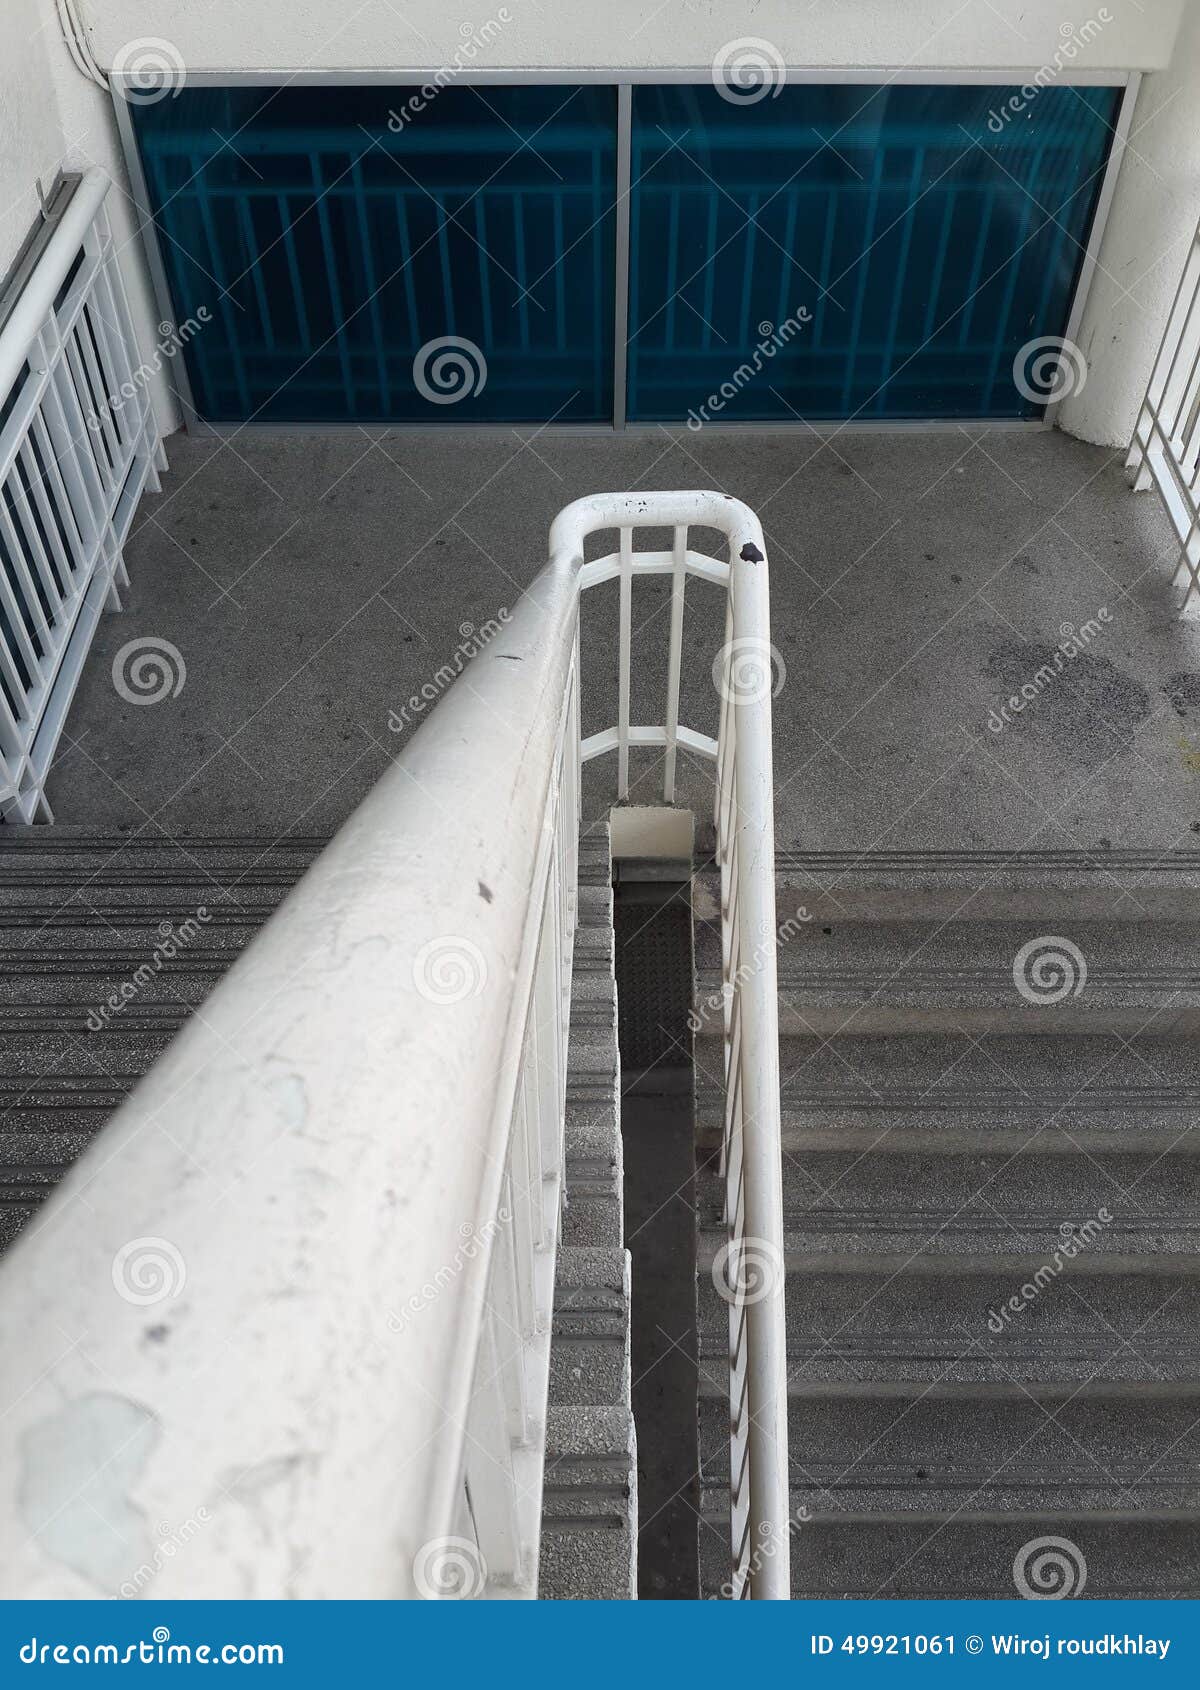 Ladder stock image. Image of growth, design, buying, lime - 49921061